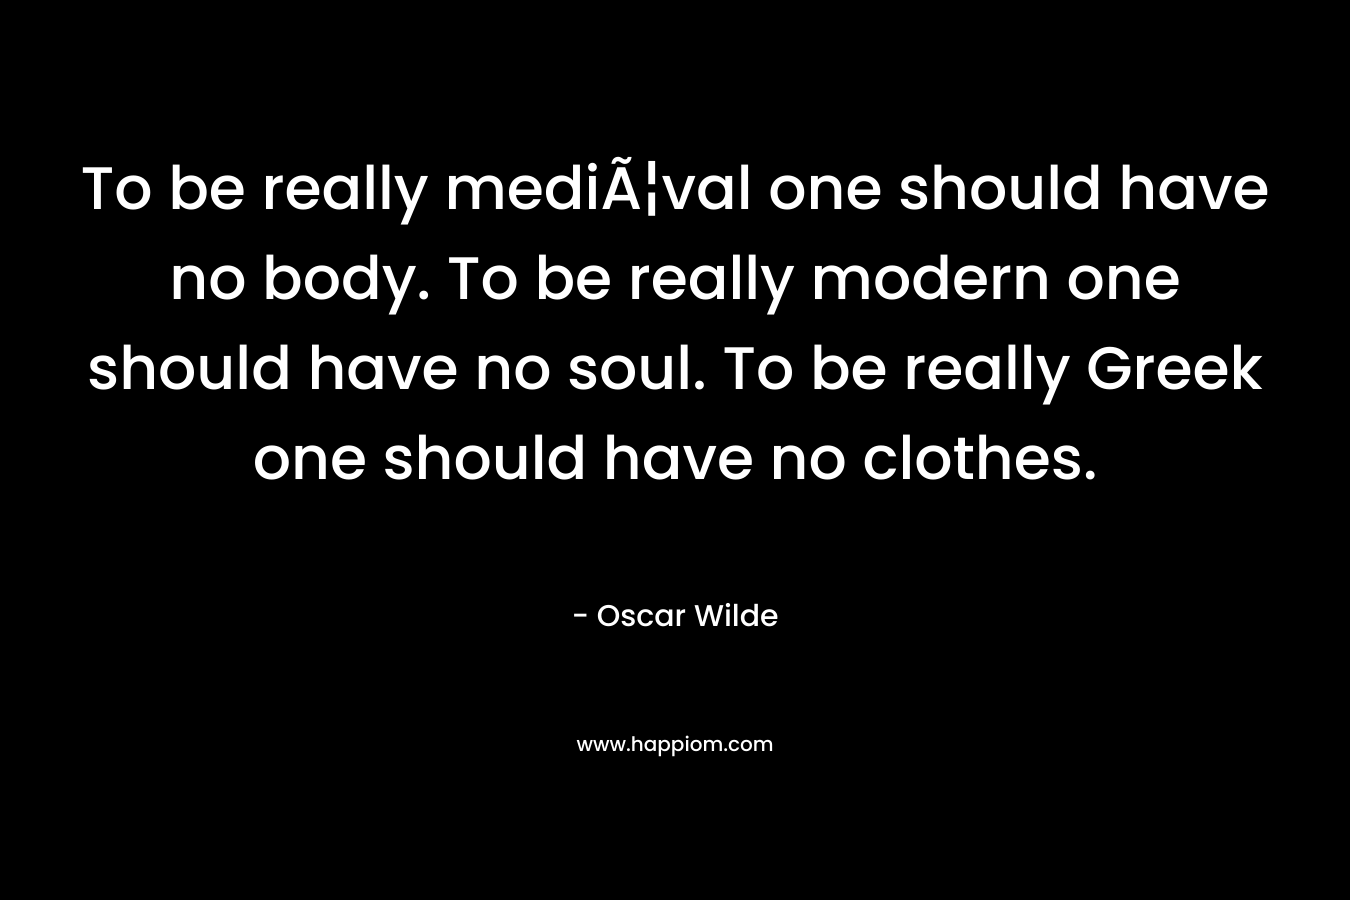 To be really mediÃ¦val one should have no body. To be really modern one should have no soul. To be really Greek one should have no clothes.